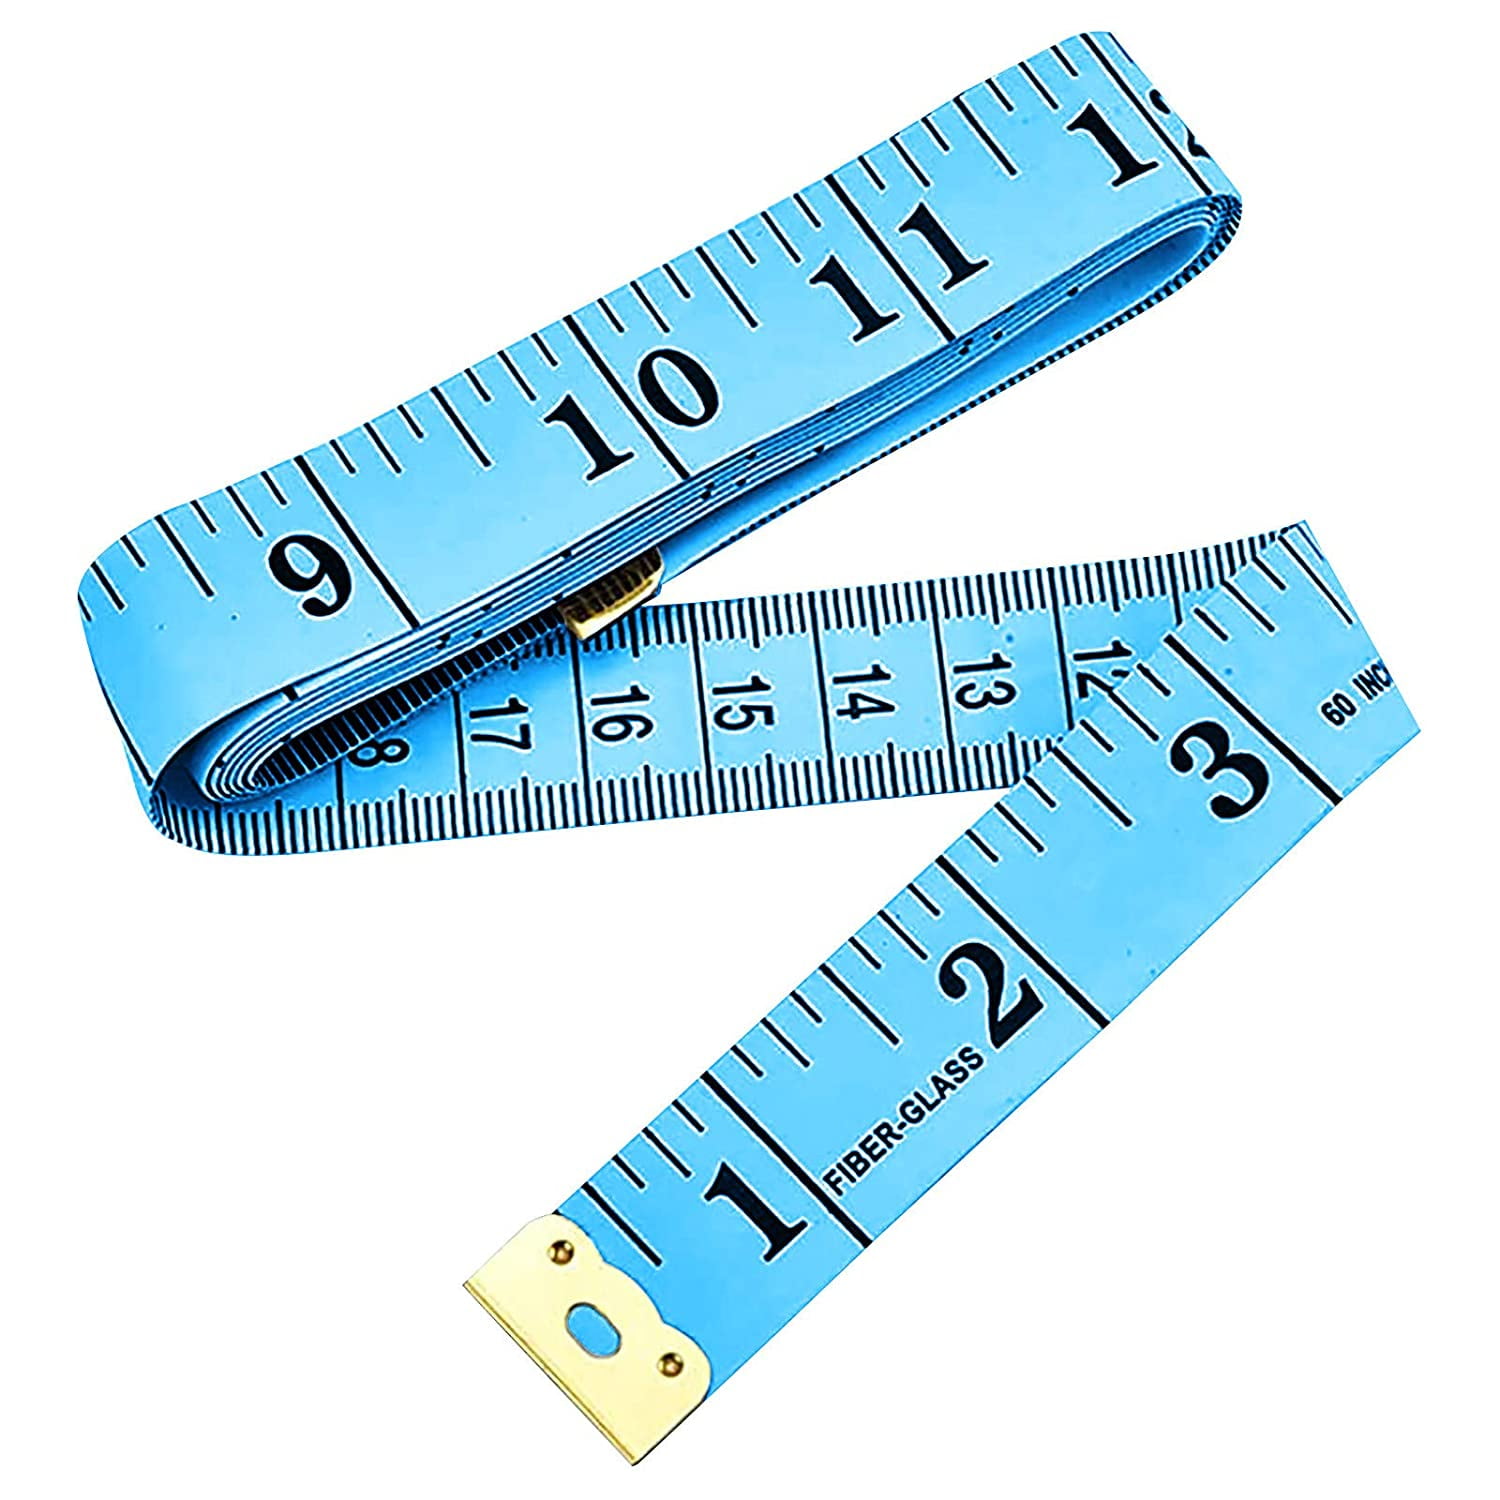 Soft Tape Measure,Measuring Tape Body Sewing Waist Bra Head Circumference  for Body Measurement Sewing Tailor Cloth Knitting Home Craft Vinyl